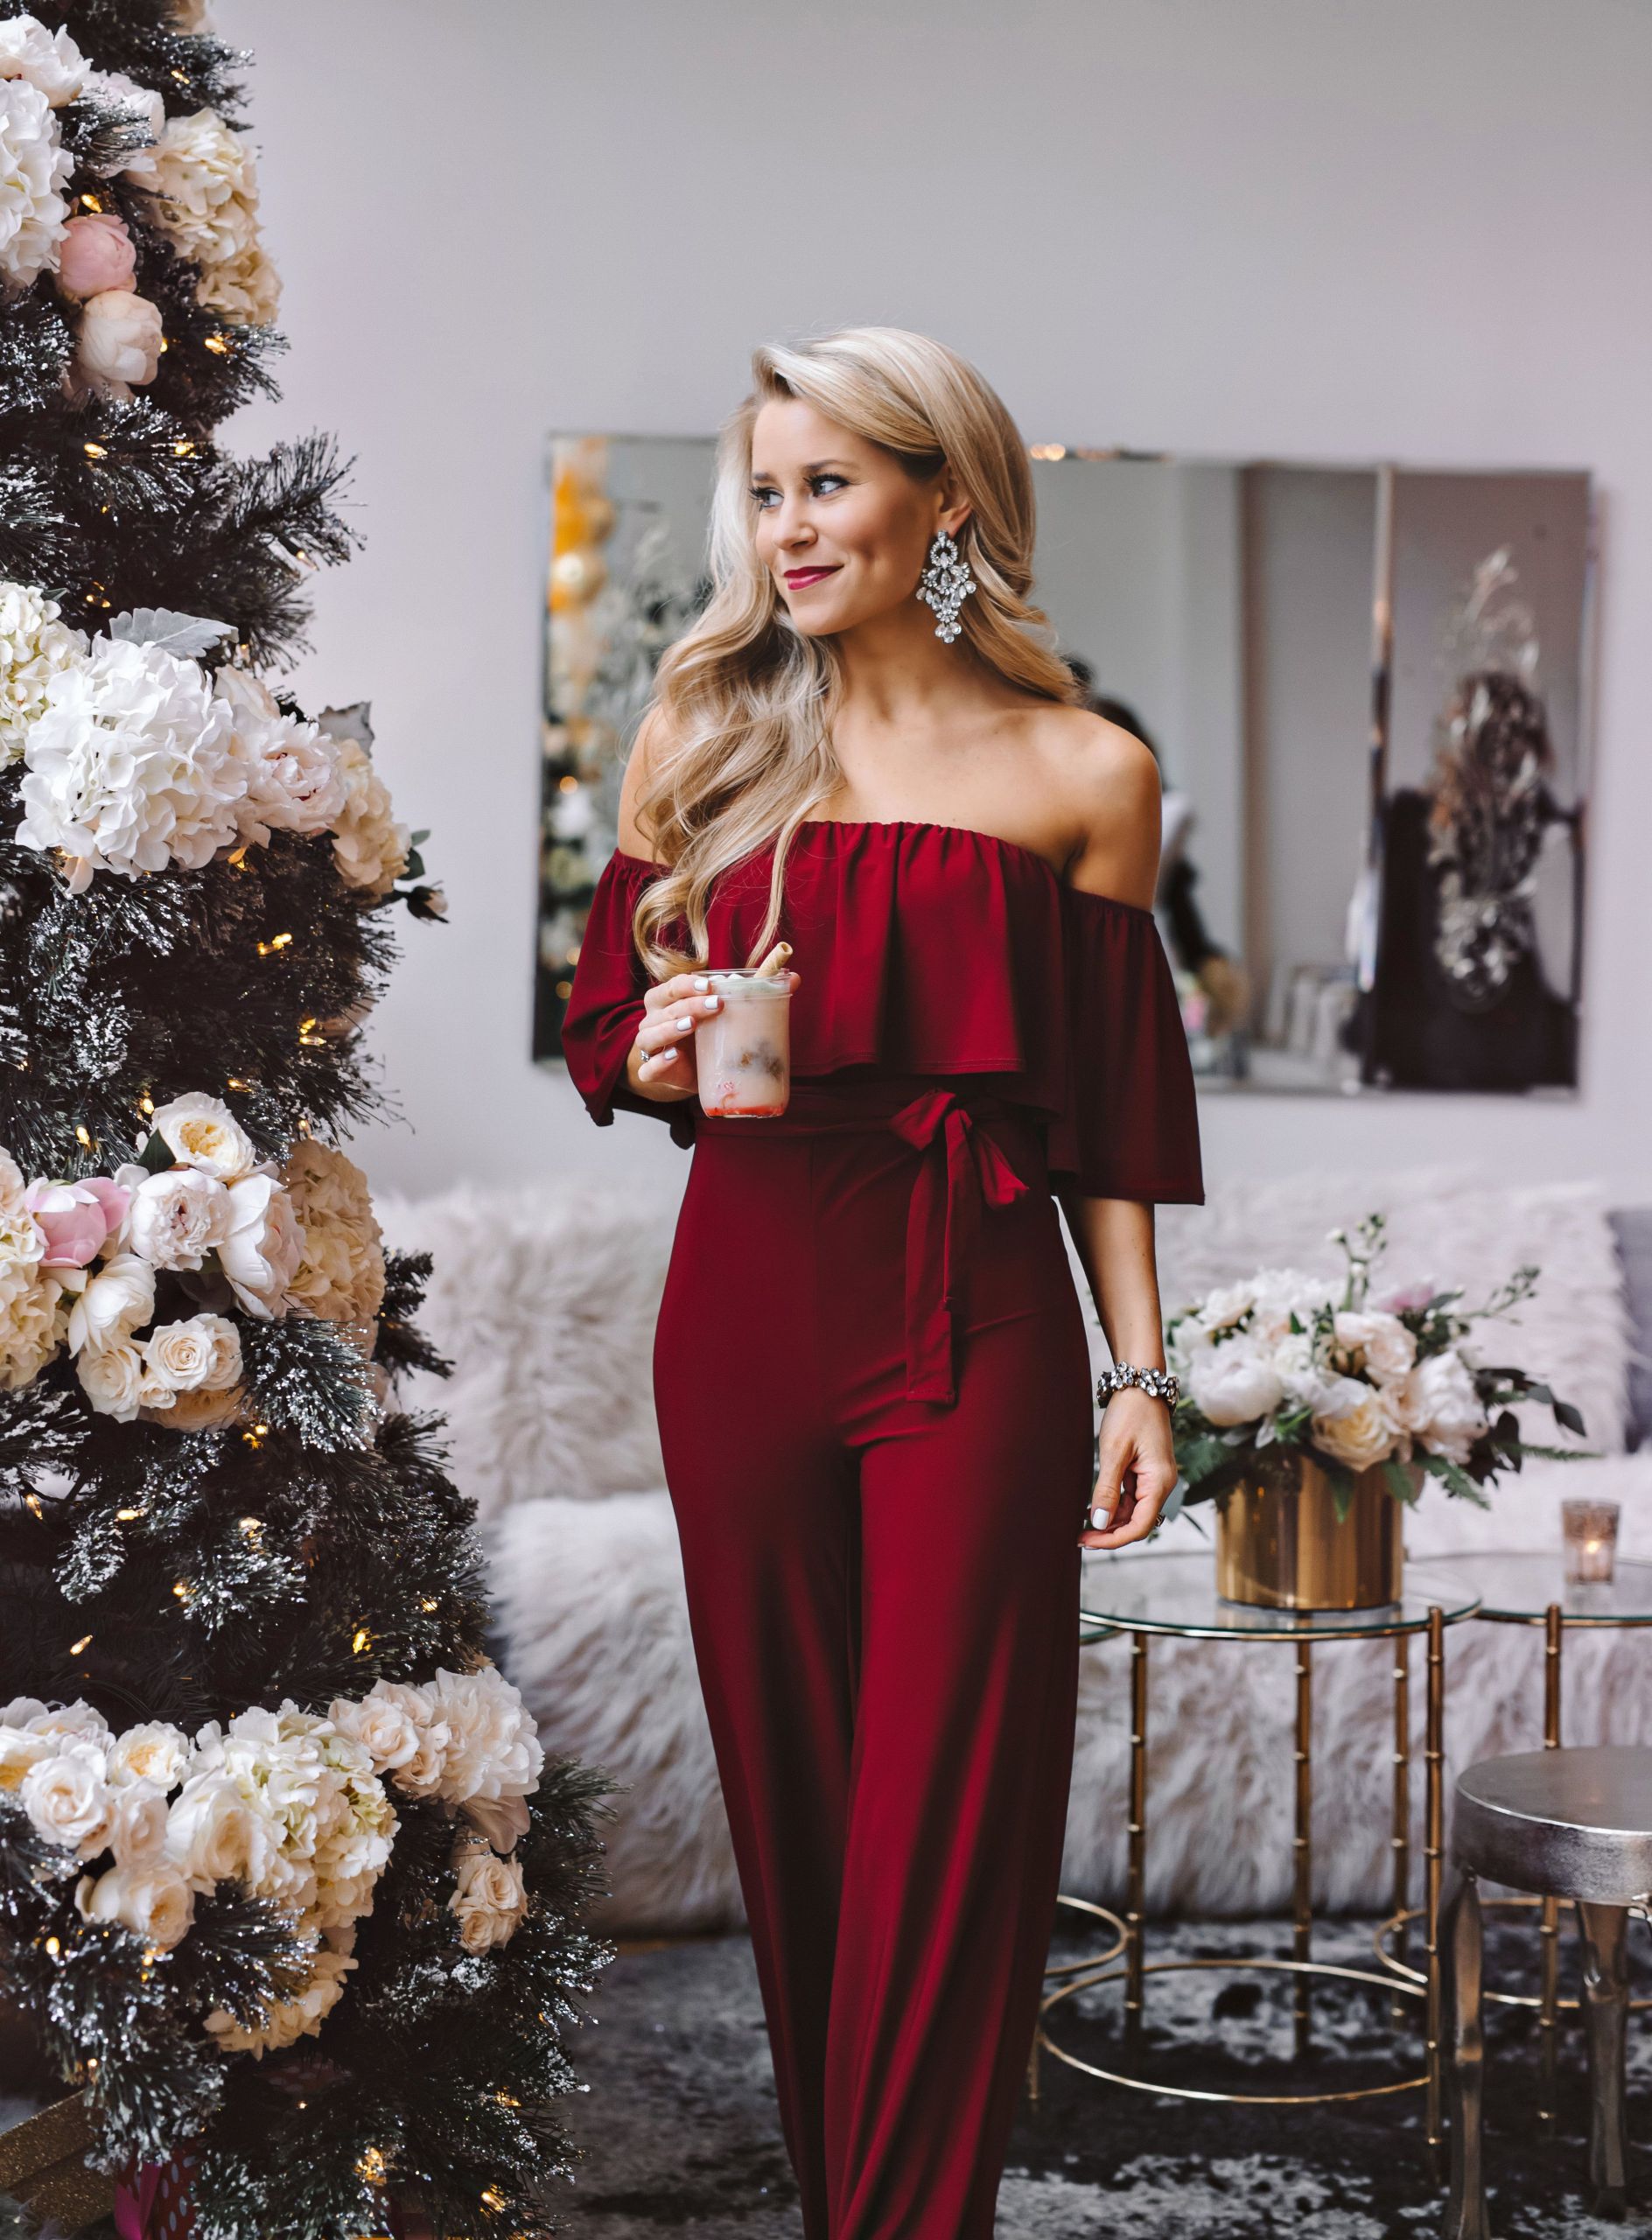 Christmas Party Suit Ideas
 Holiday Party Decor Outfit Ideas